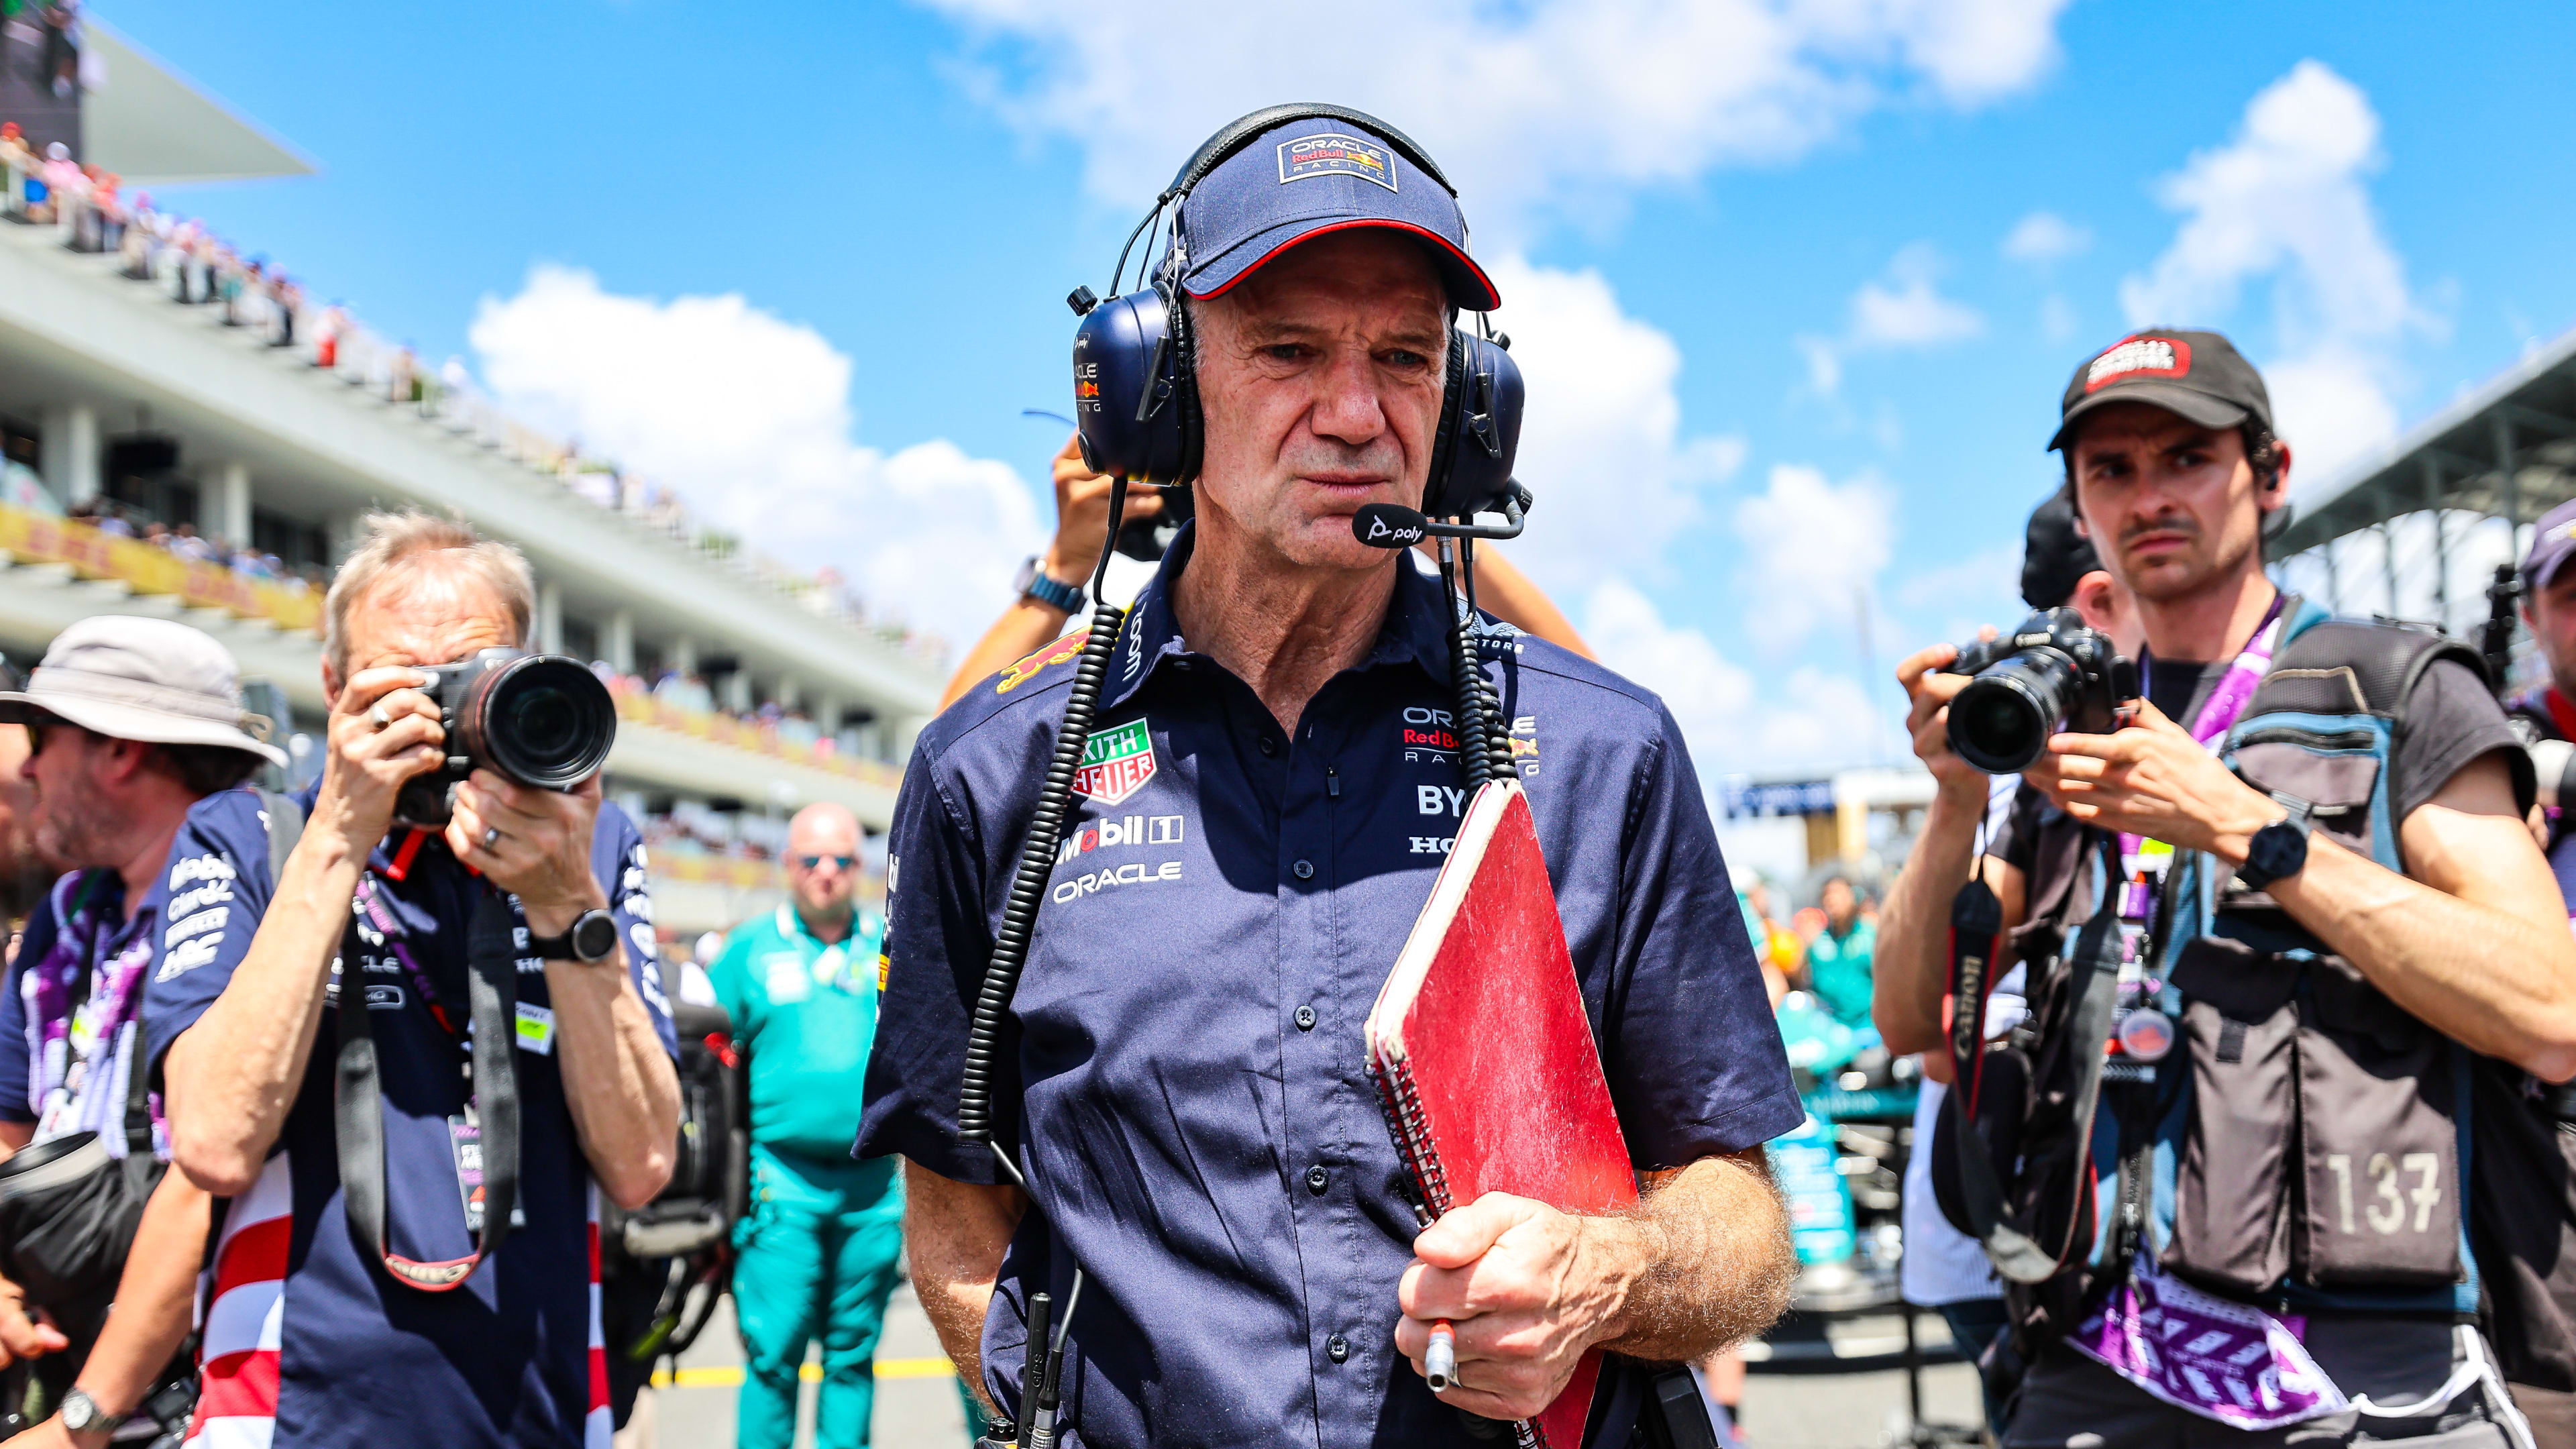 Our writers share their views on where they’d love to see Adrian Newey next after his Red Bull departure